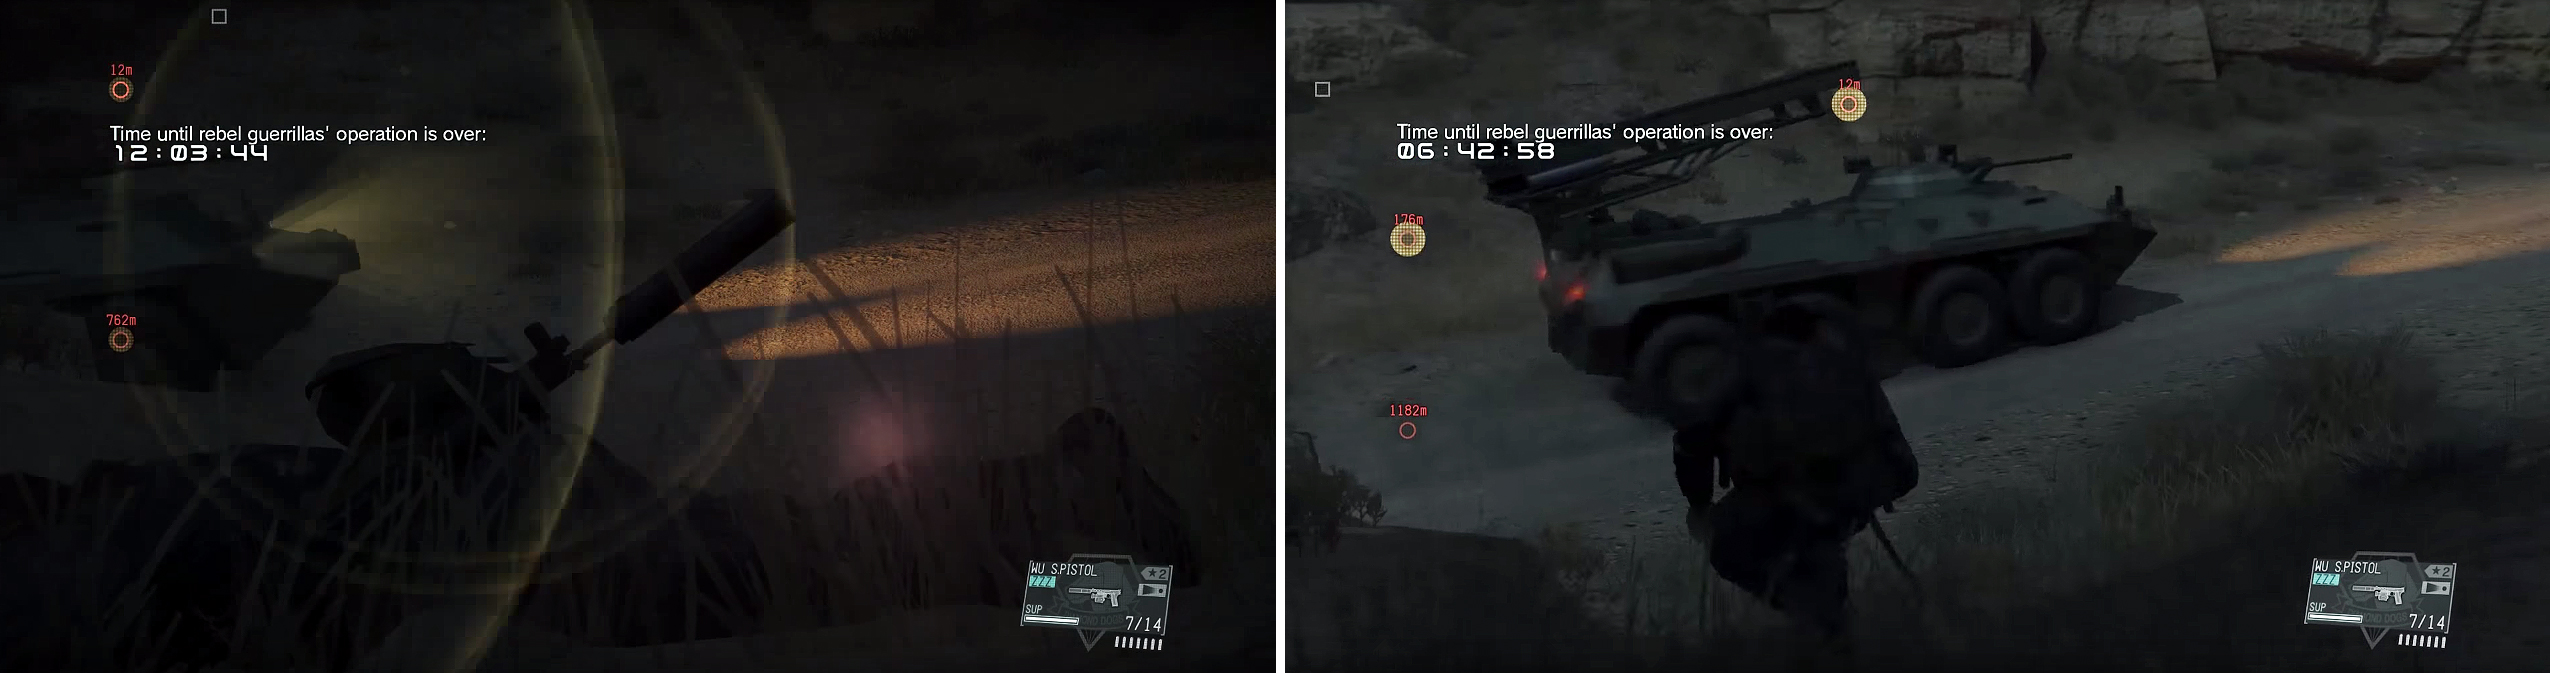 Look for the lens flare (left) and as soon as it disappears, you’re safe to move and get in behind the vehicle (right).